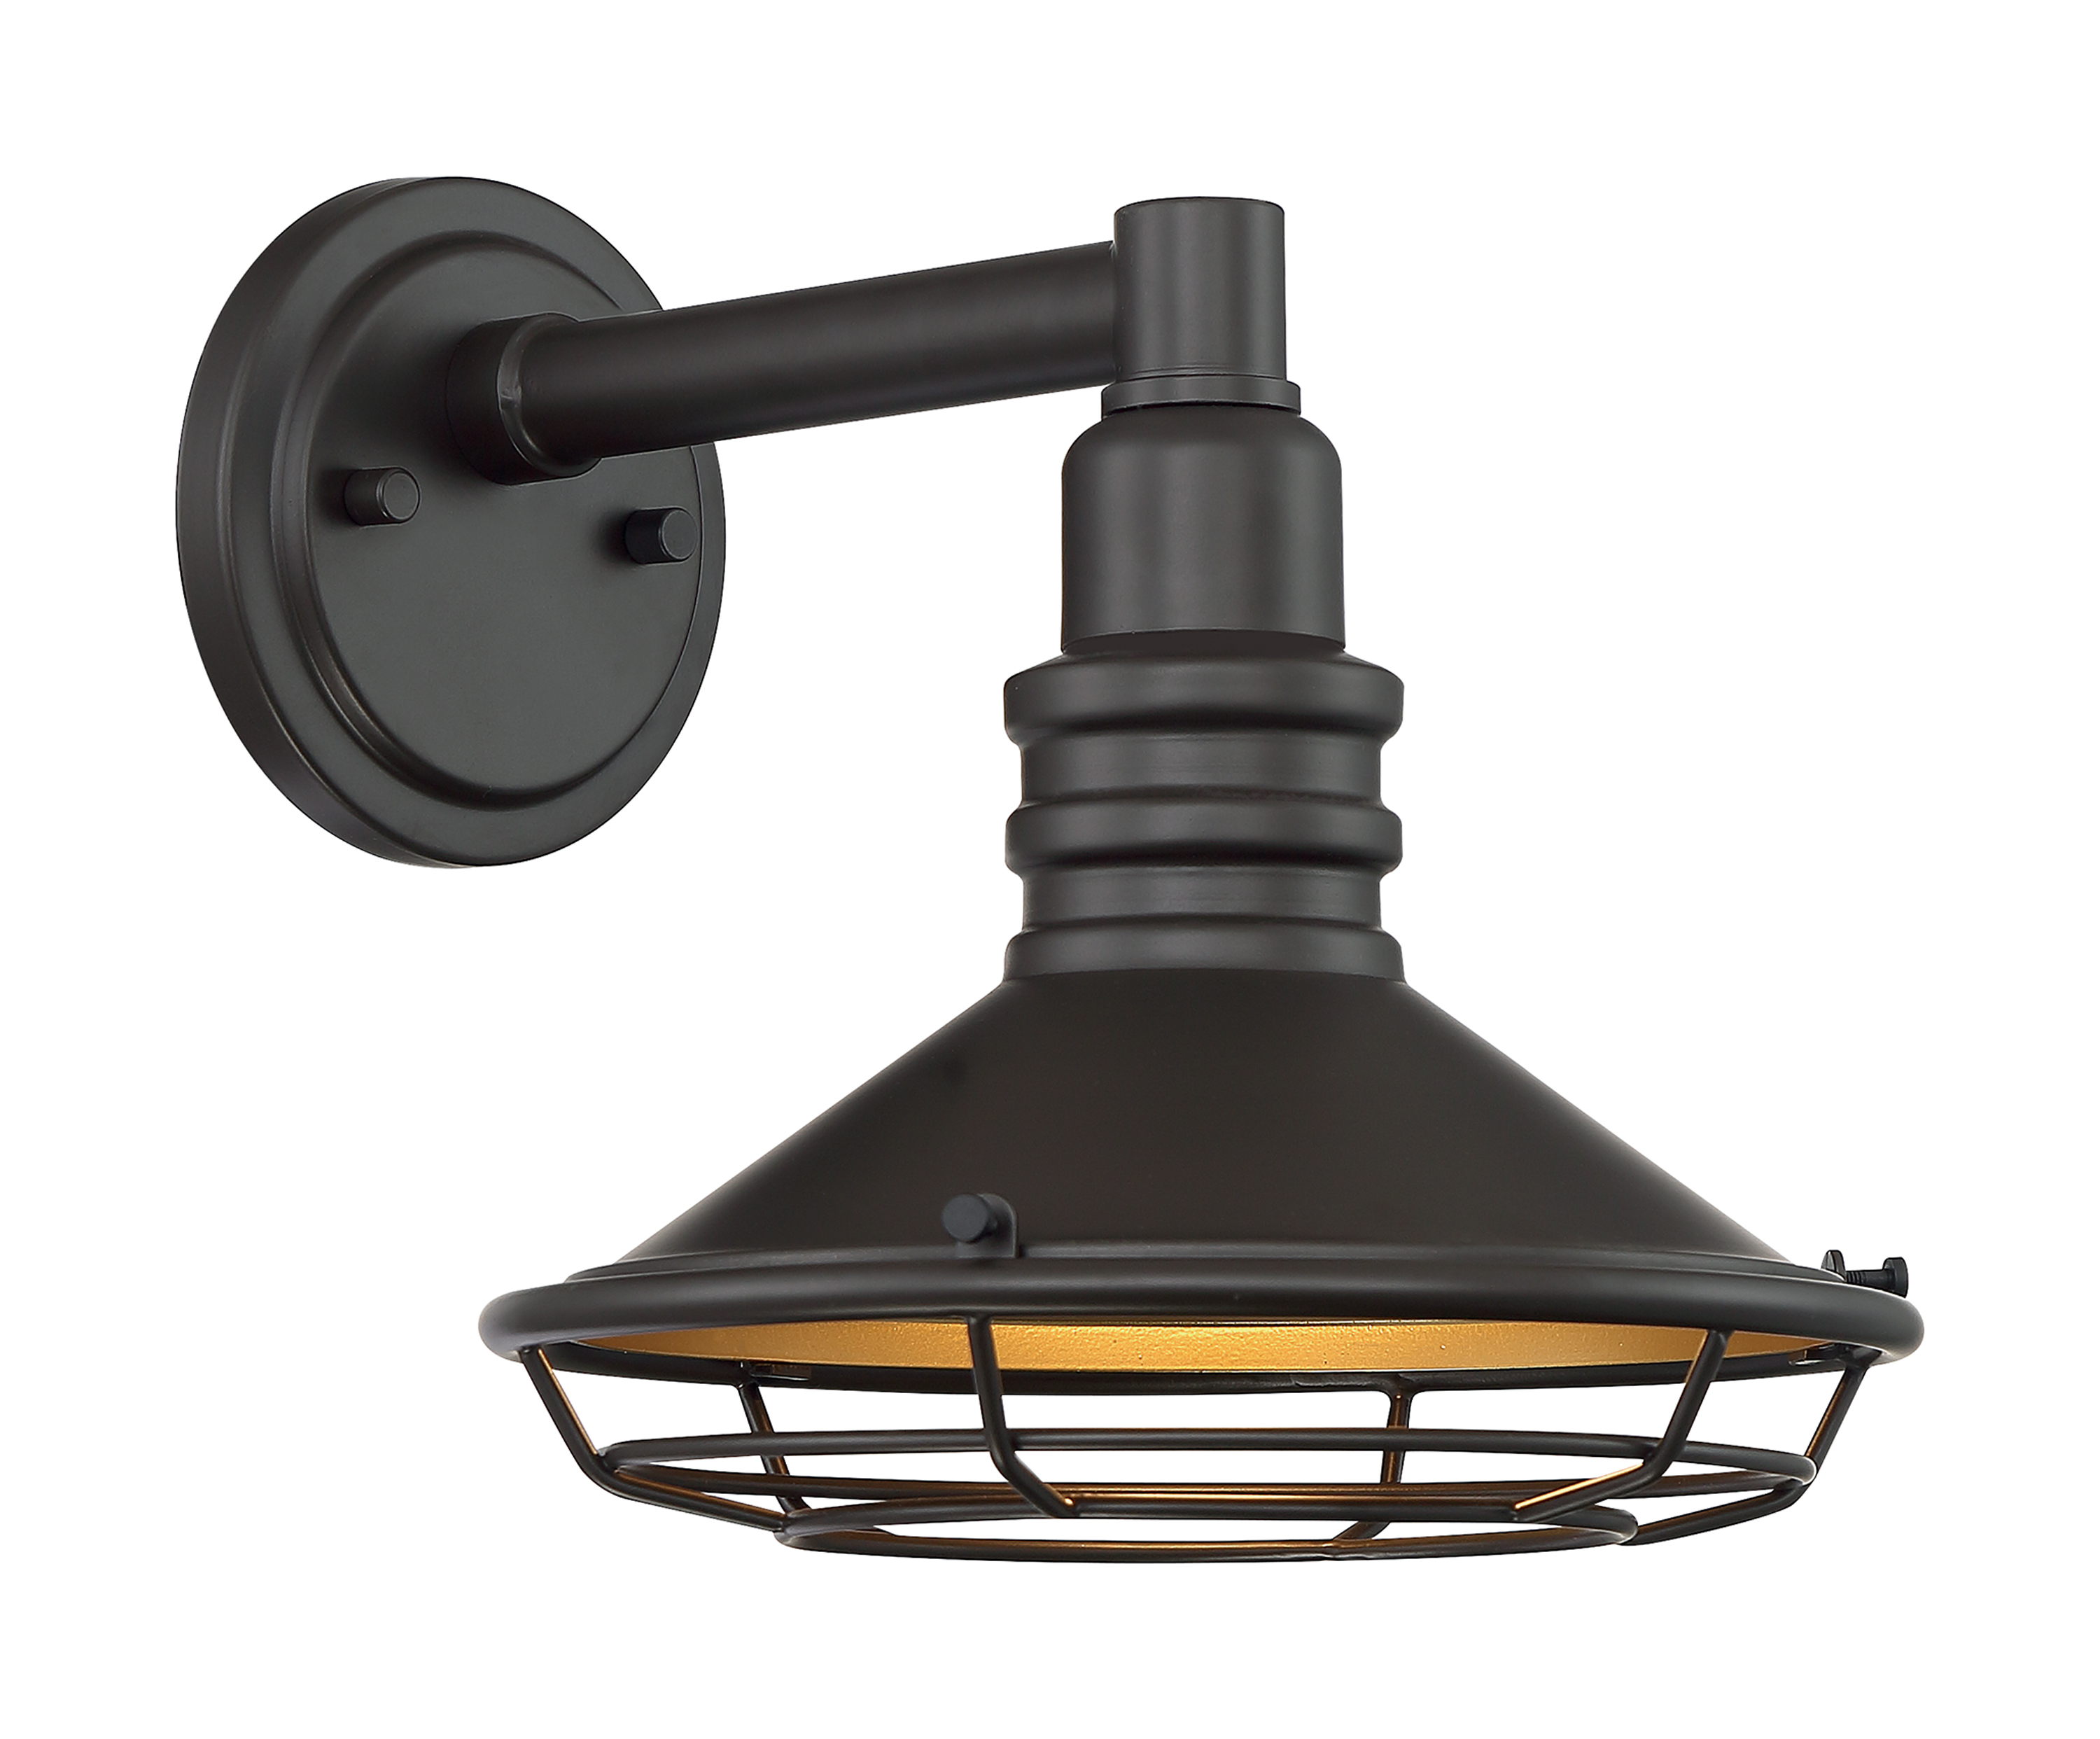 Blue Harbor 1-Light Small Outdoor Wall Sconce Fixture - Dark Bronze Finish with Gold Accents